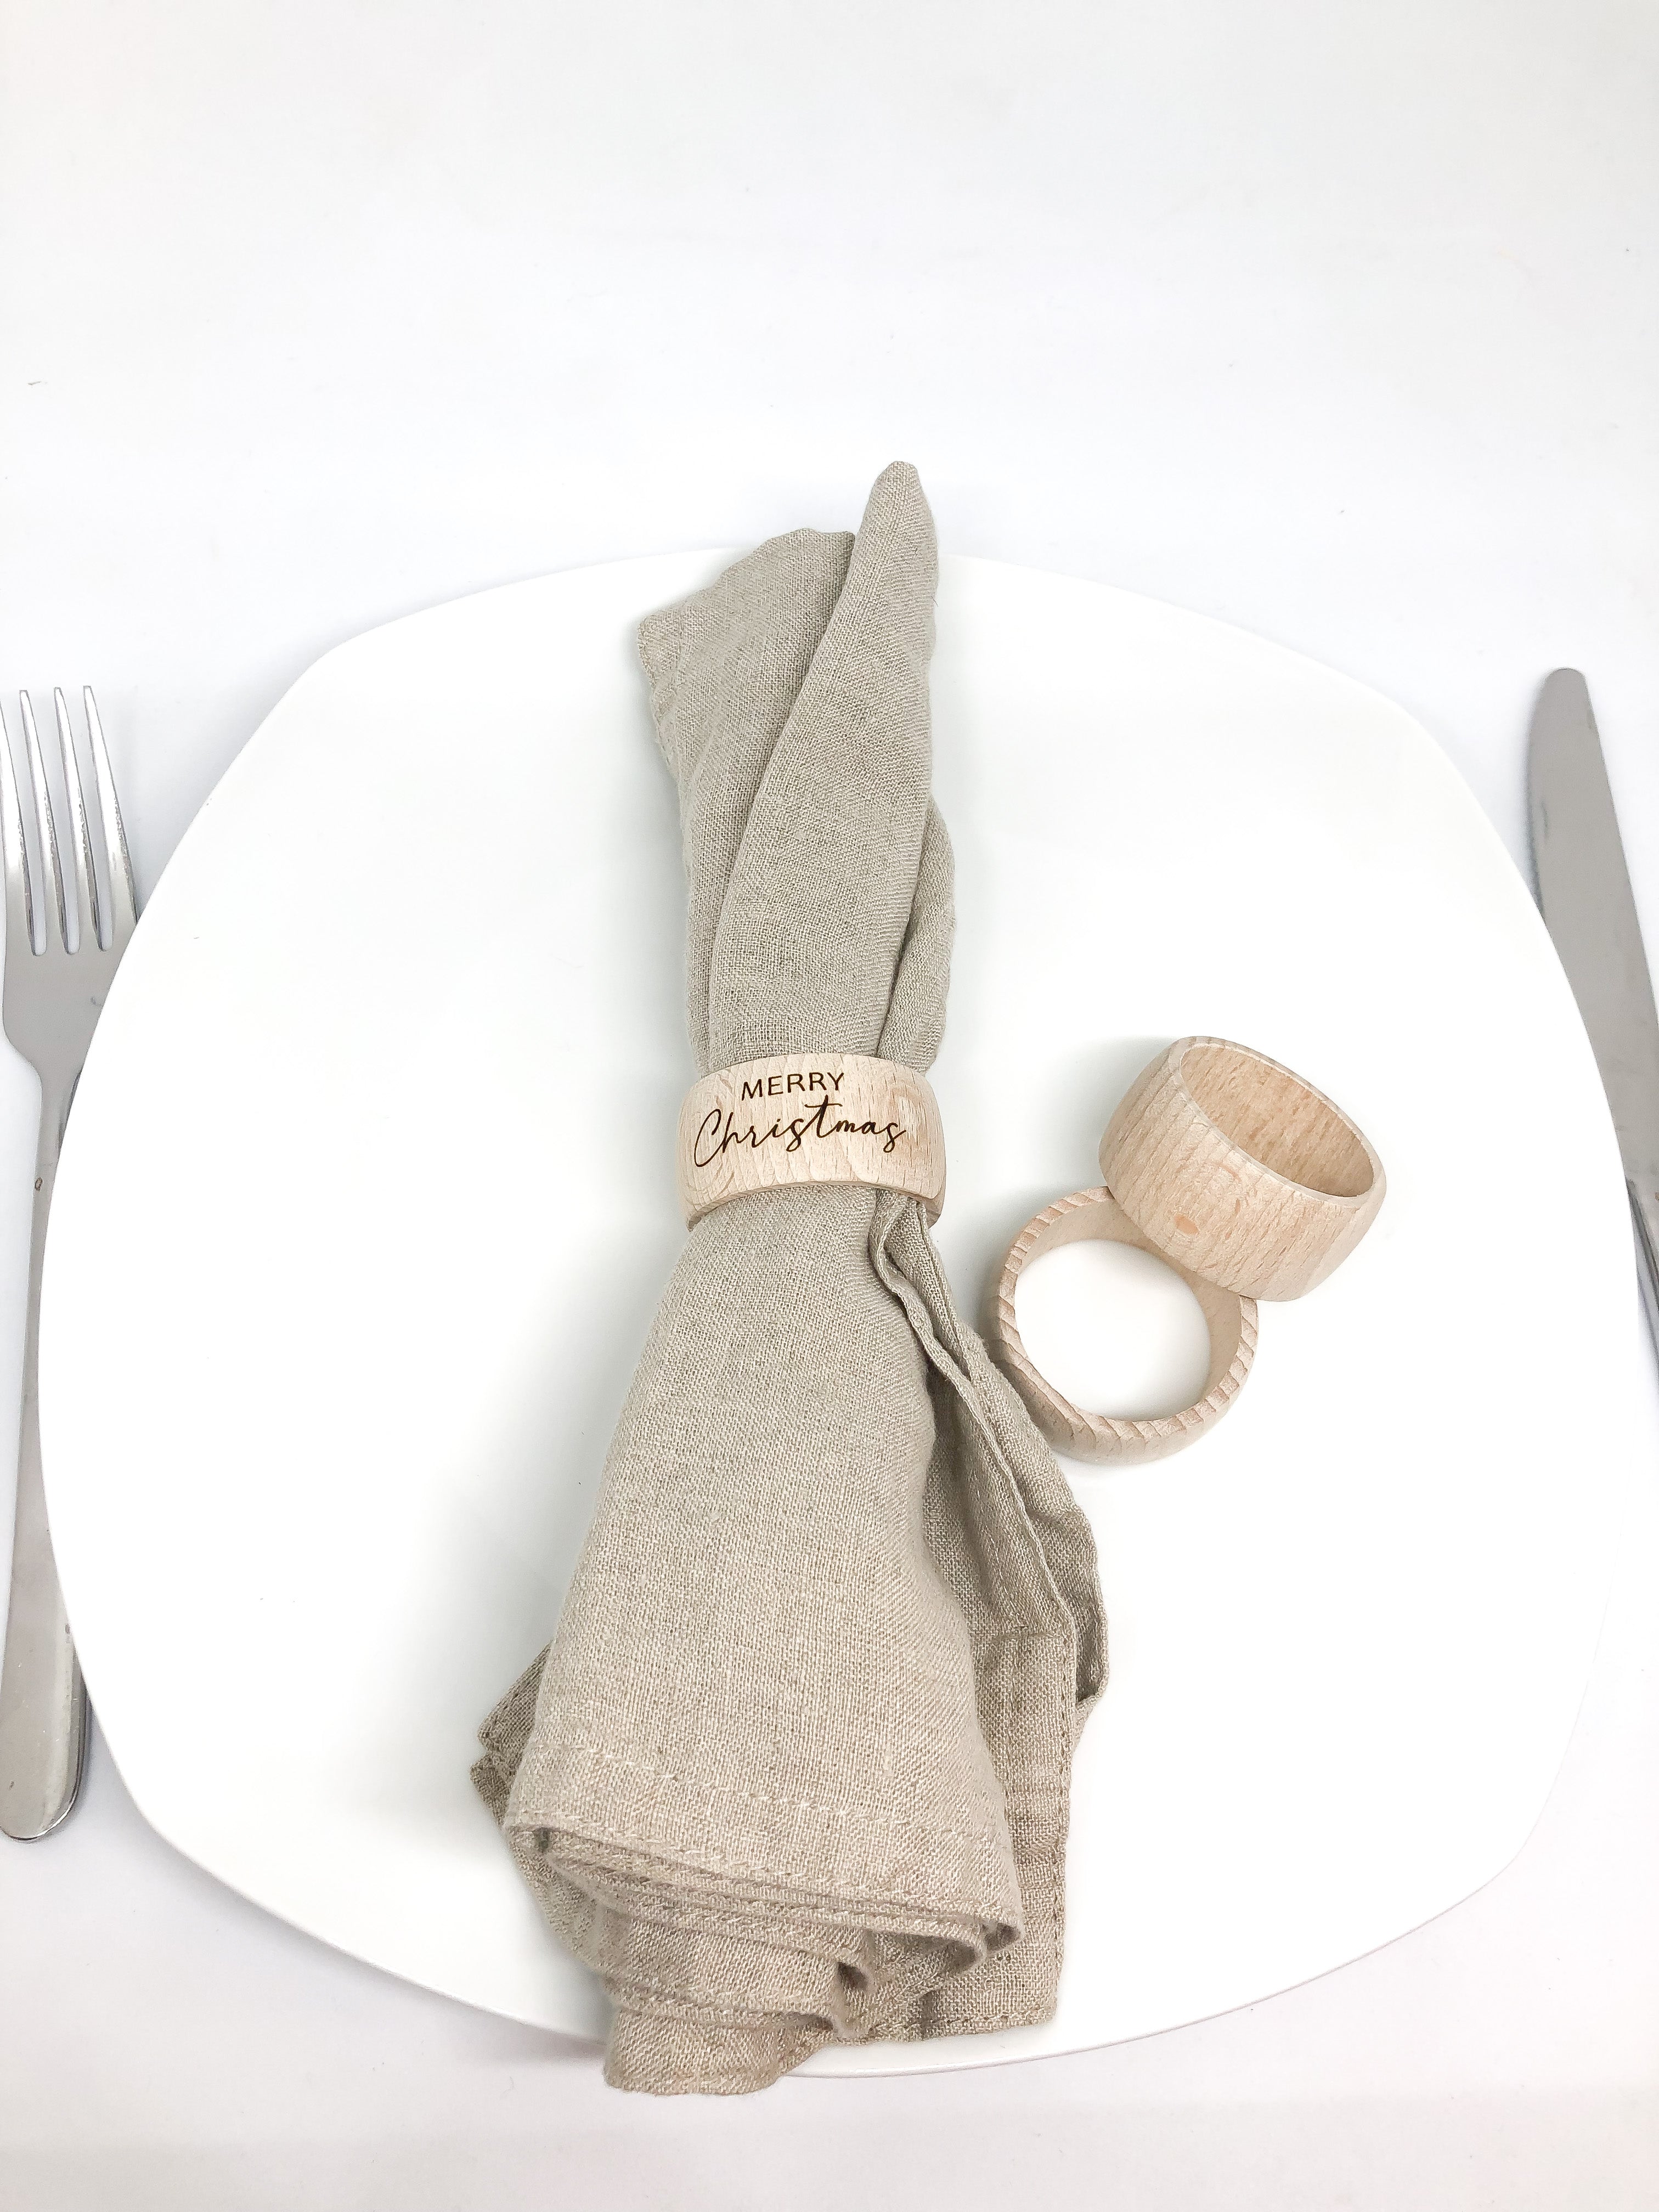 Personalized napkin ring made of beech wood (cursive font)